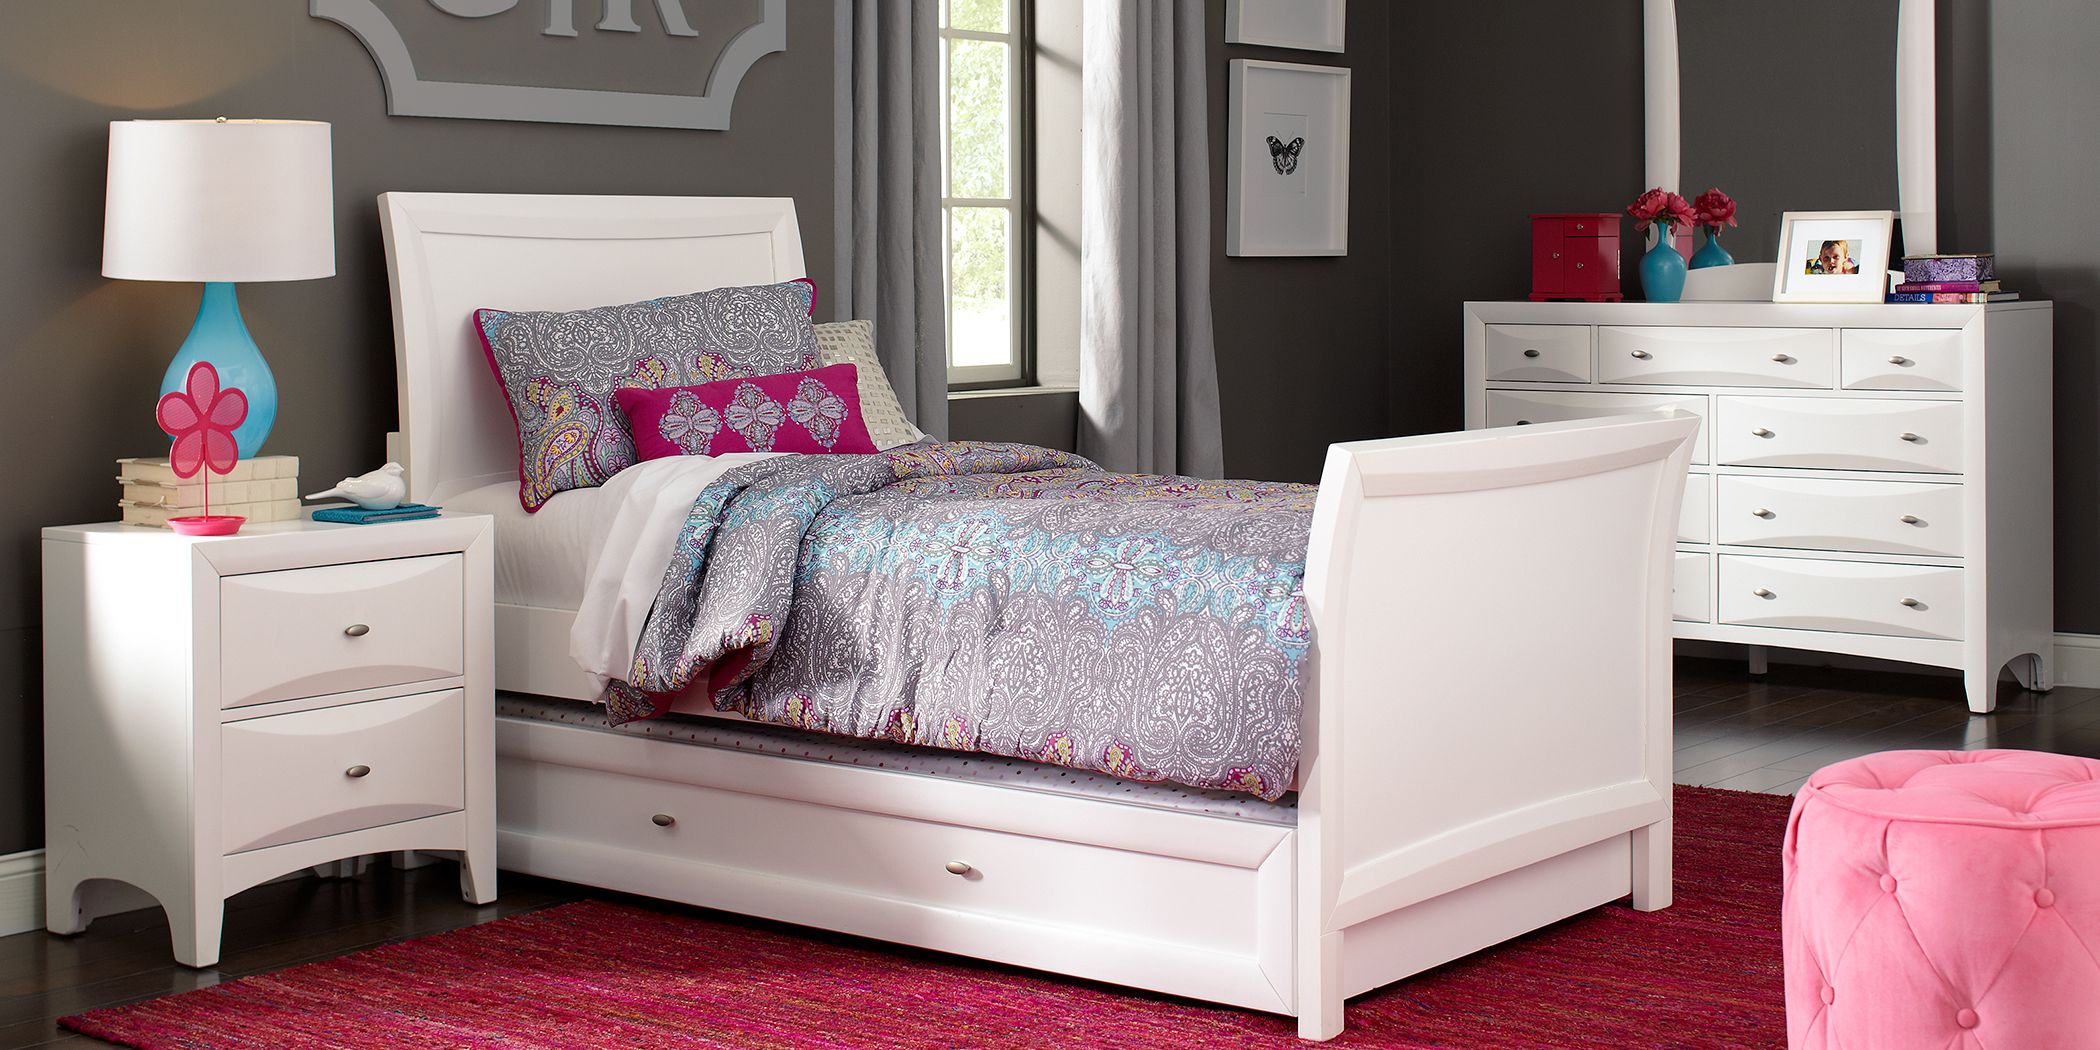 twin size bed for little girl